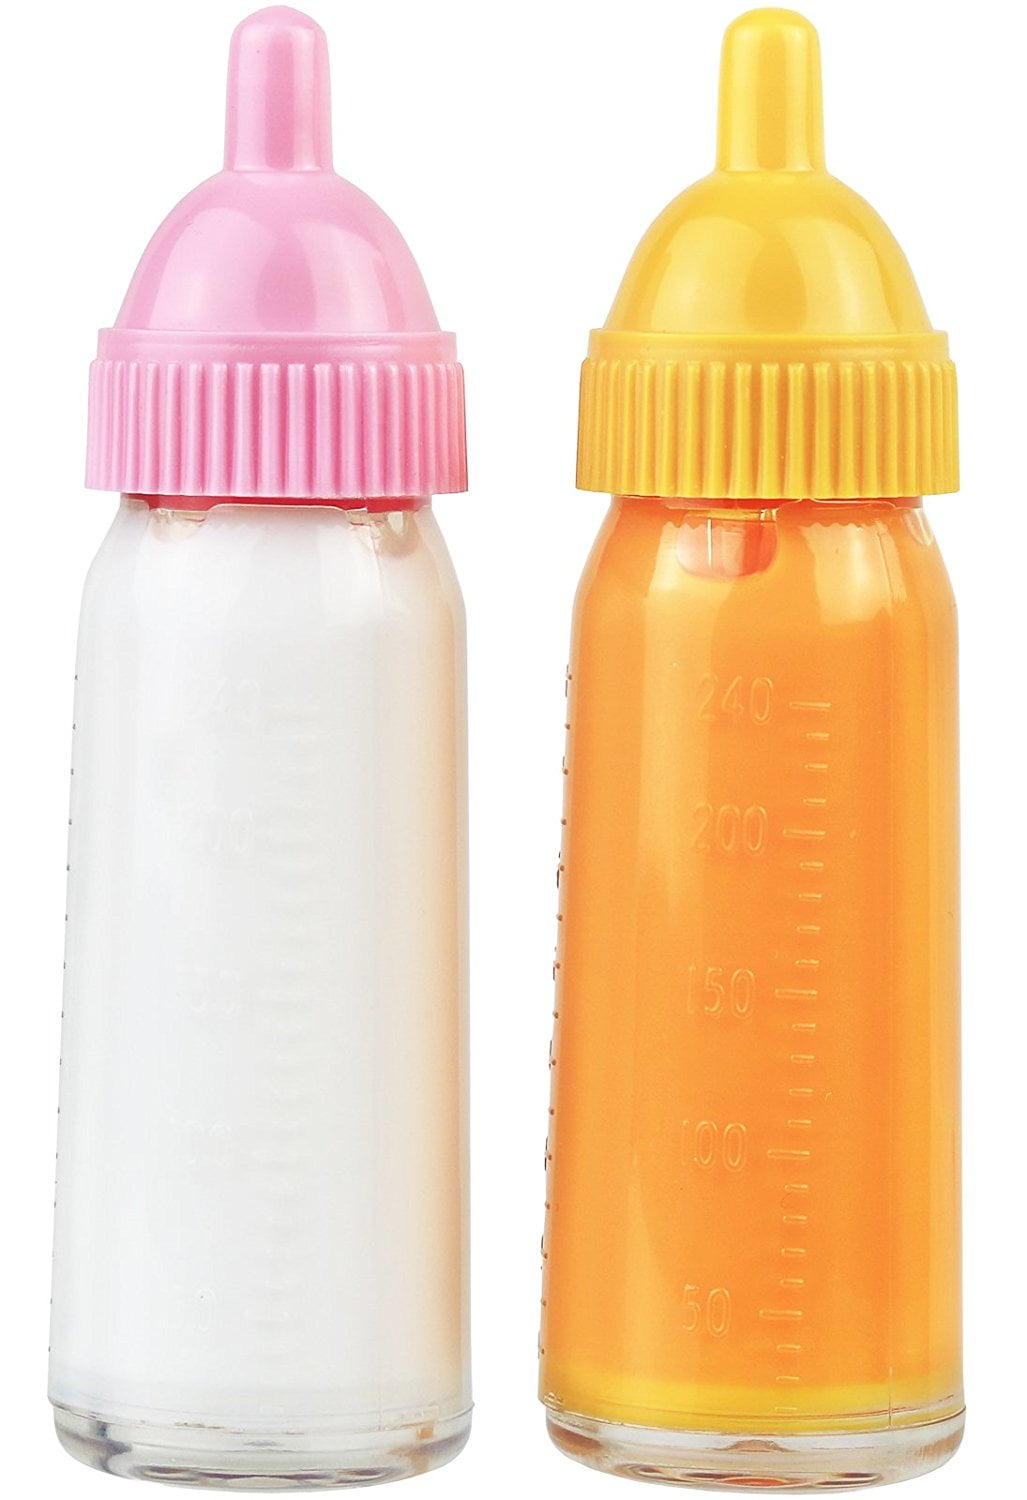 NEW Baby Boo Magic Baby Bottle for Dolls 